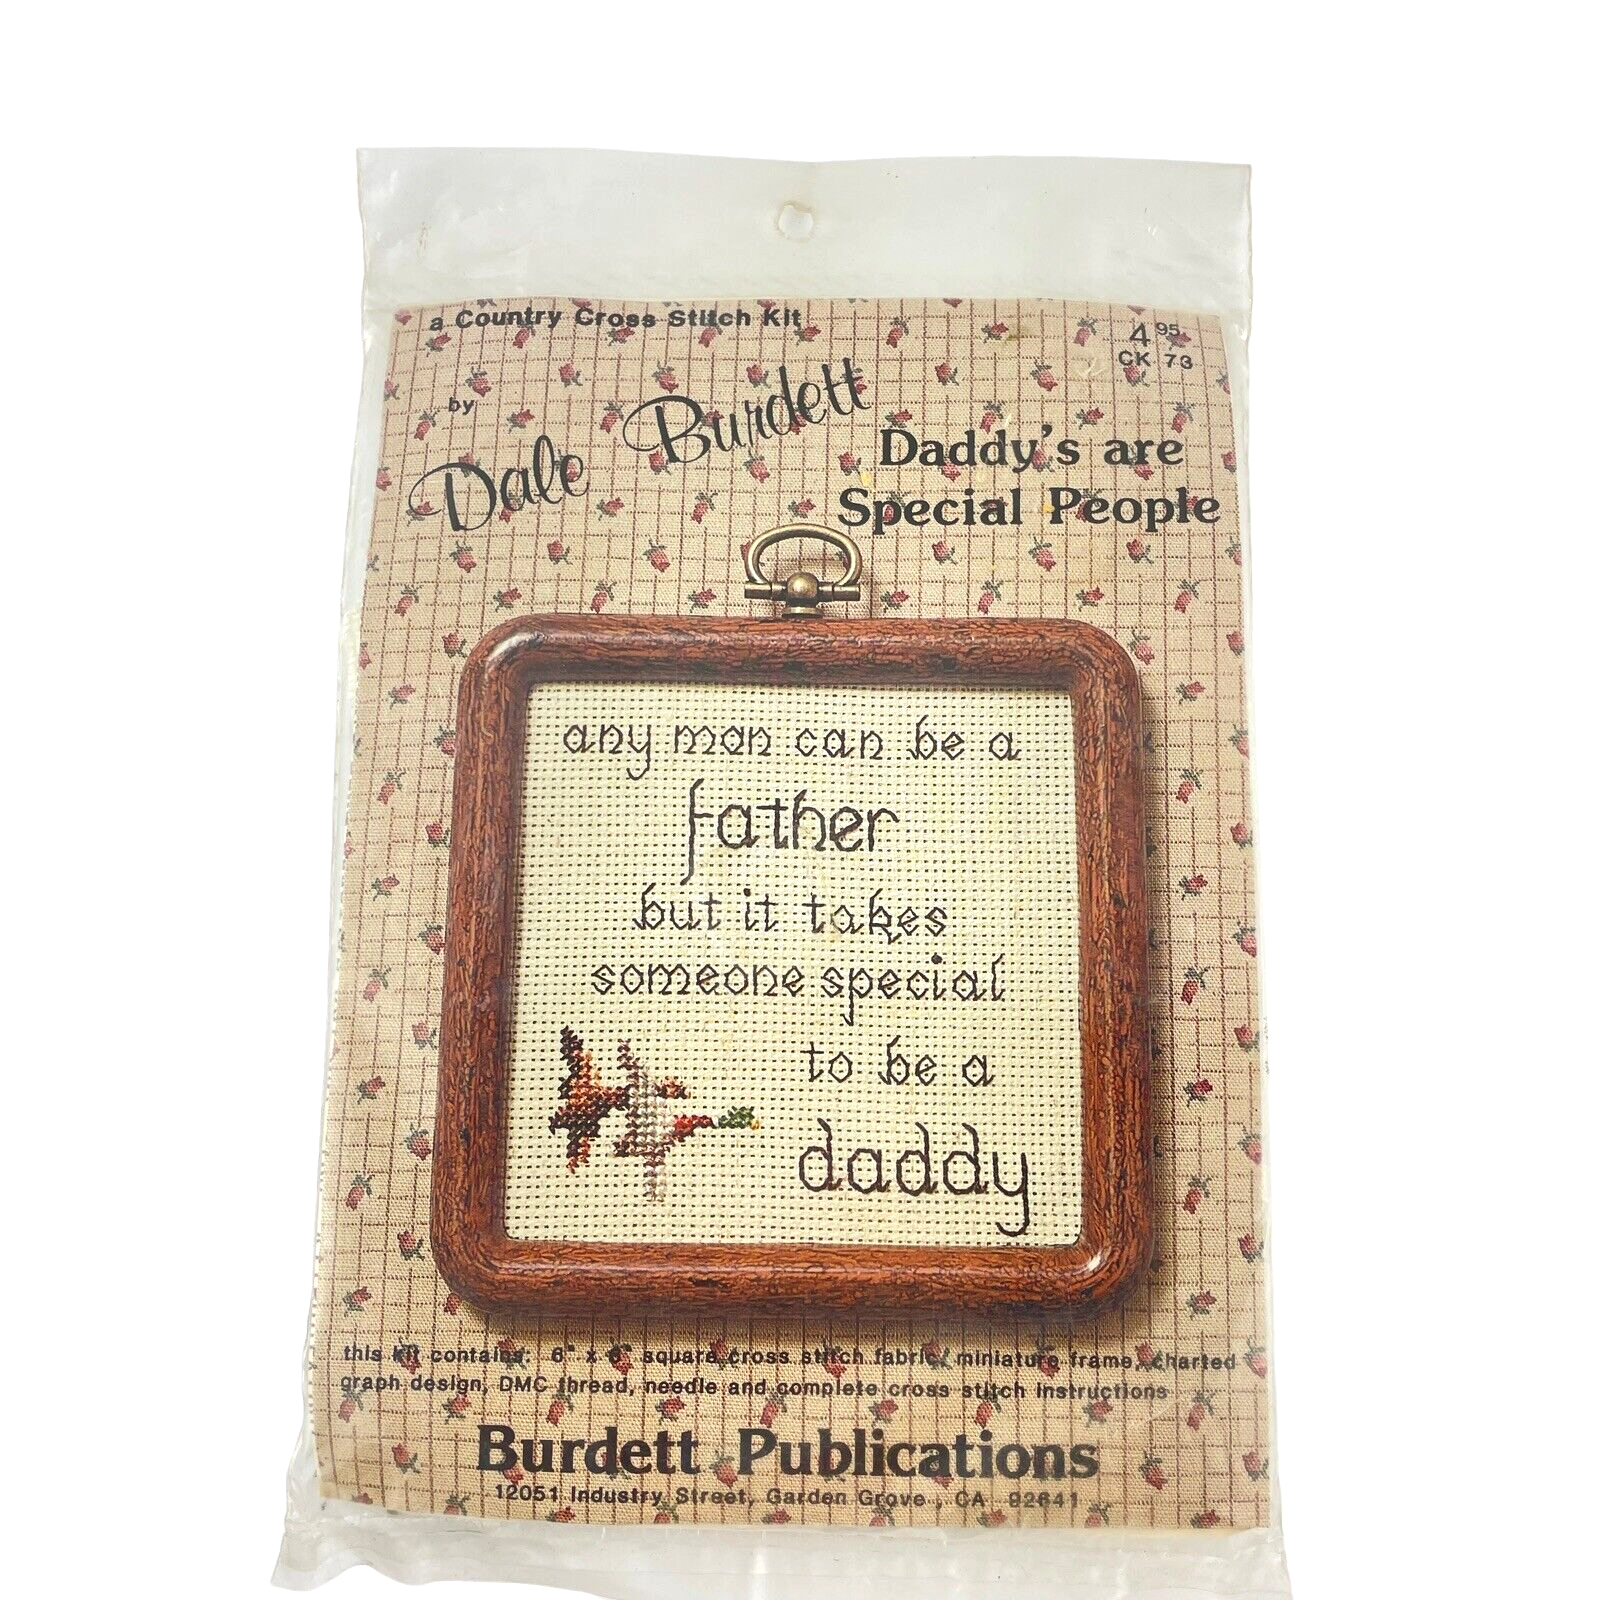 Dale Burdett Country Cross Stitch  Daddy's Are Special People Kit CK73 + Frame - $12.57